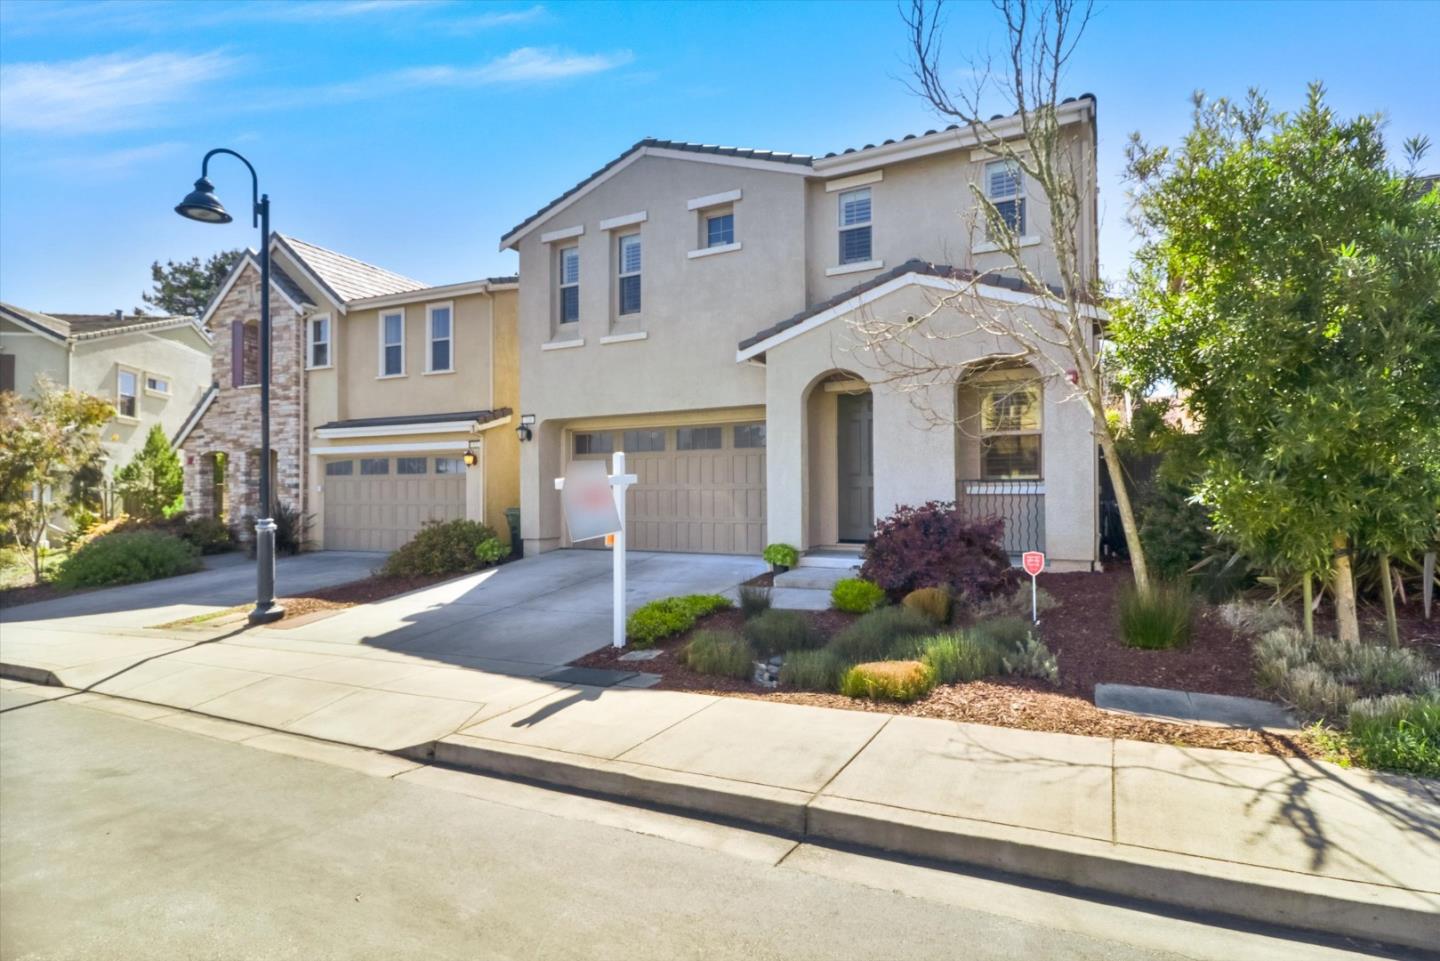 Photo of 328 Crestview Cir in Daly City, CA